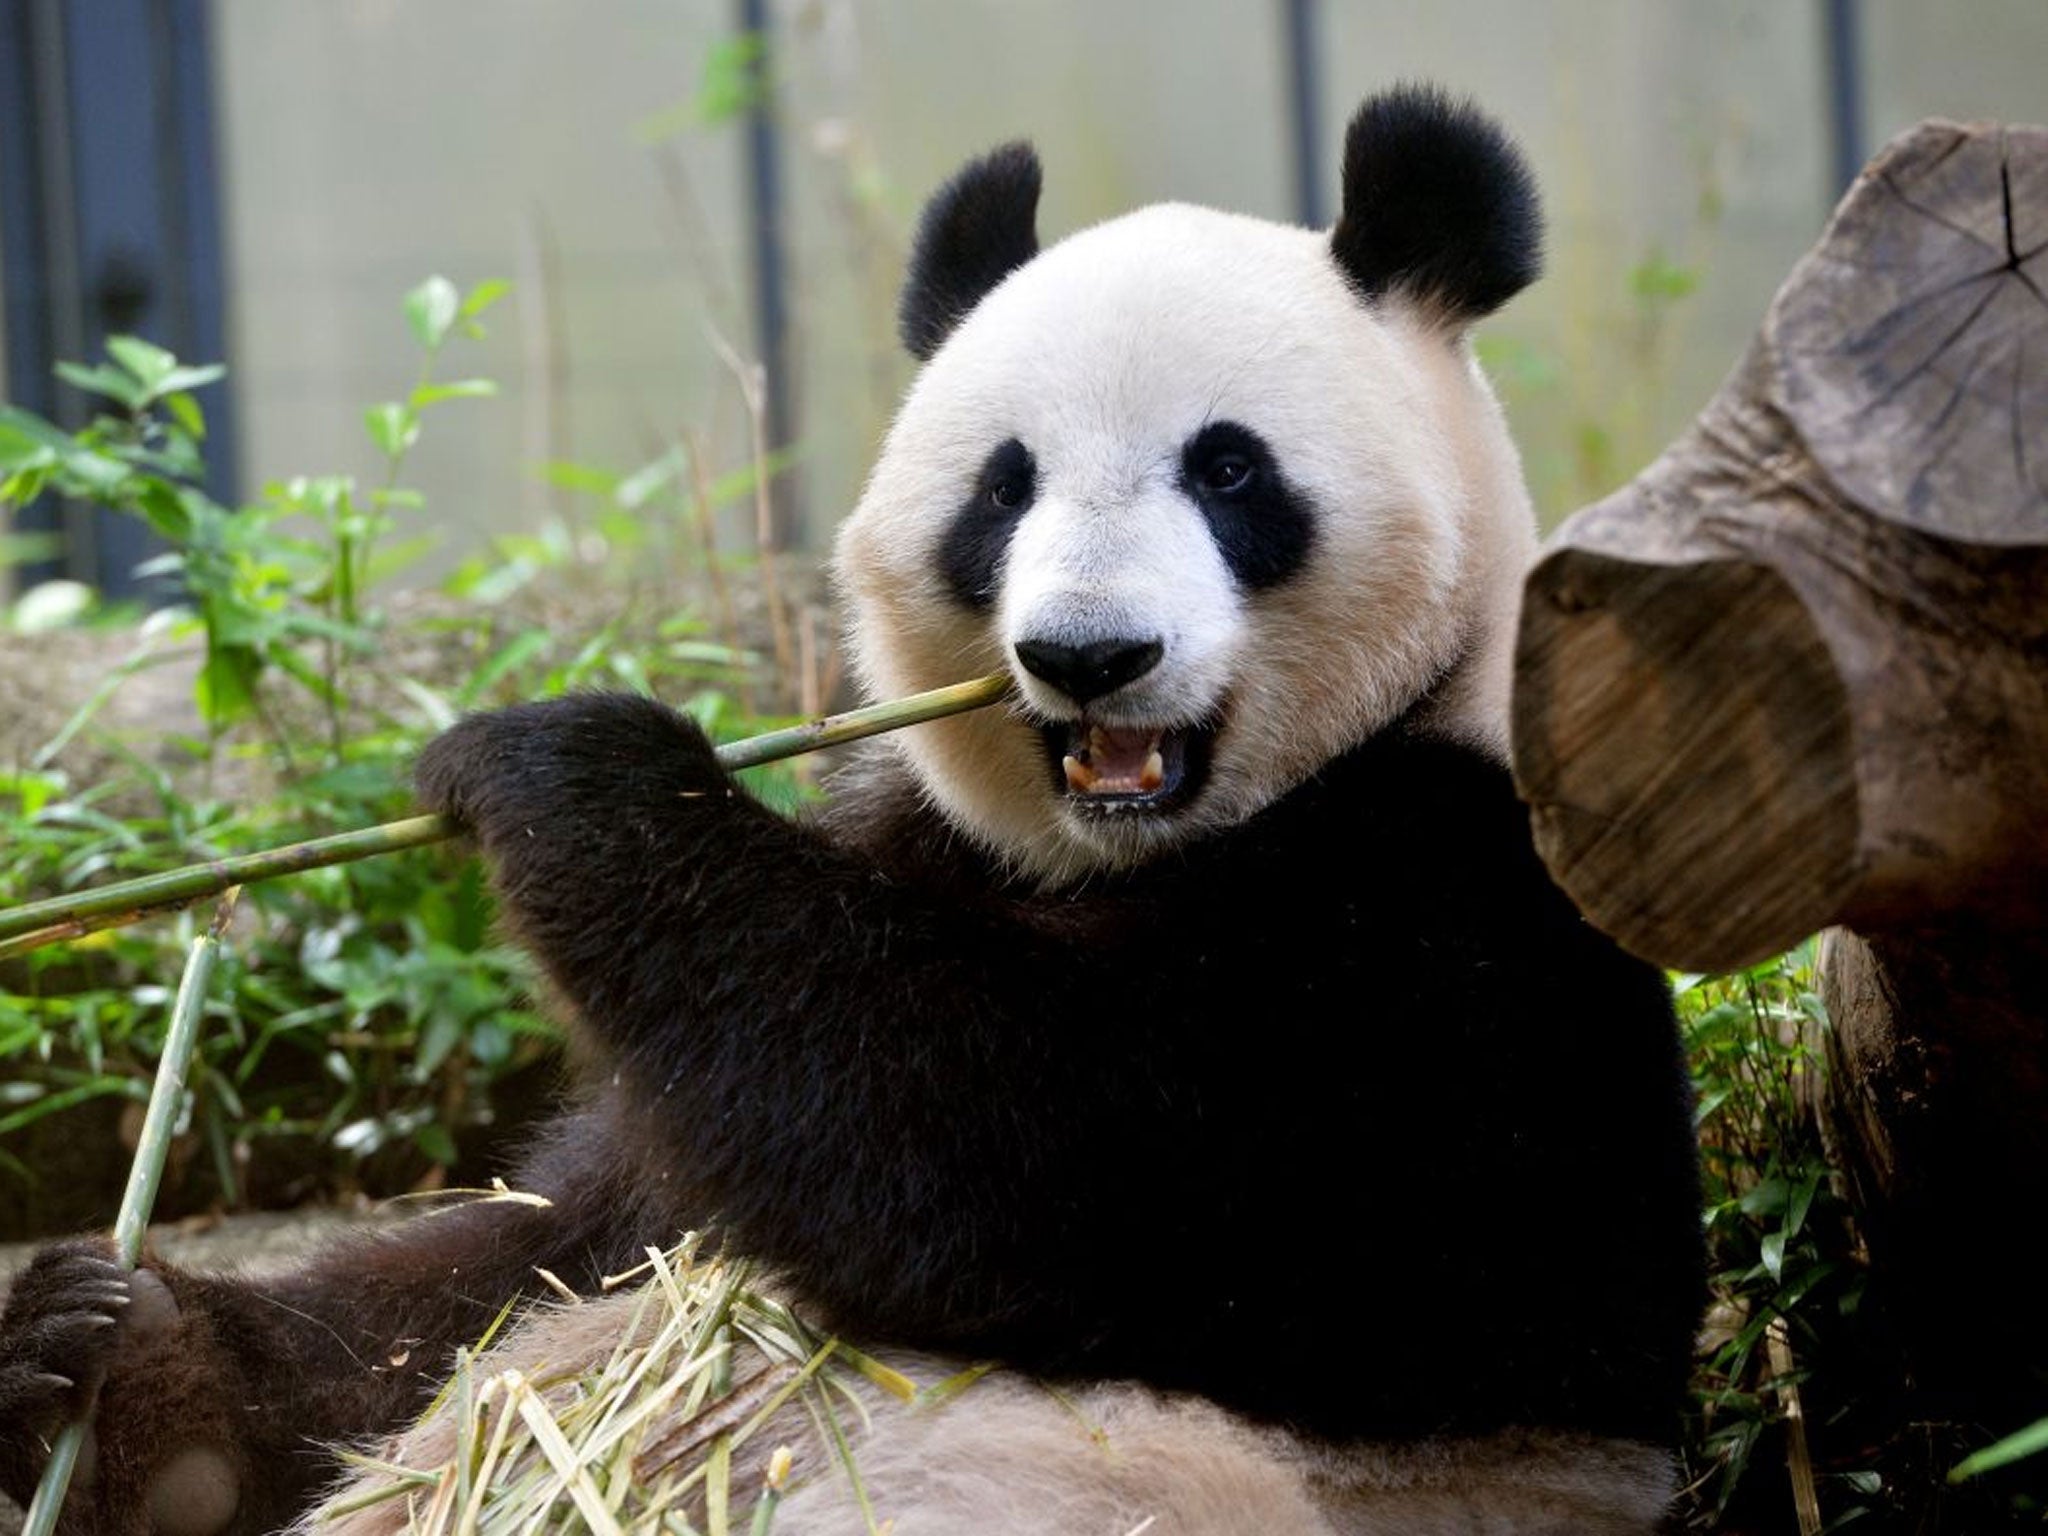 Could panda poo provide the answer to the world's energy crisis?